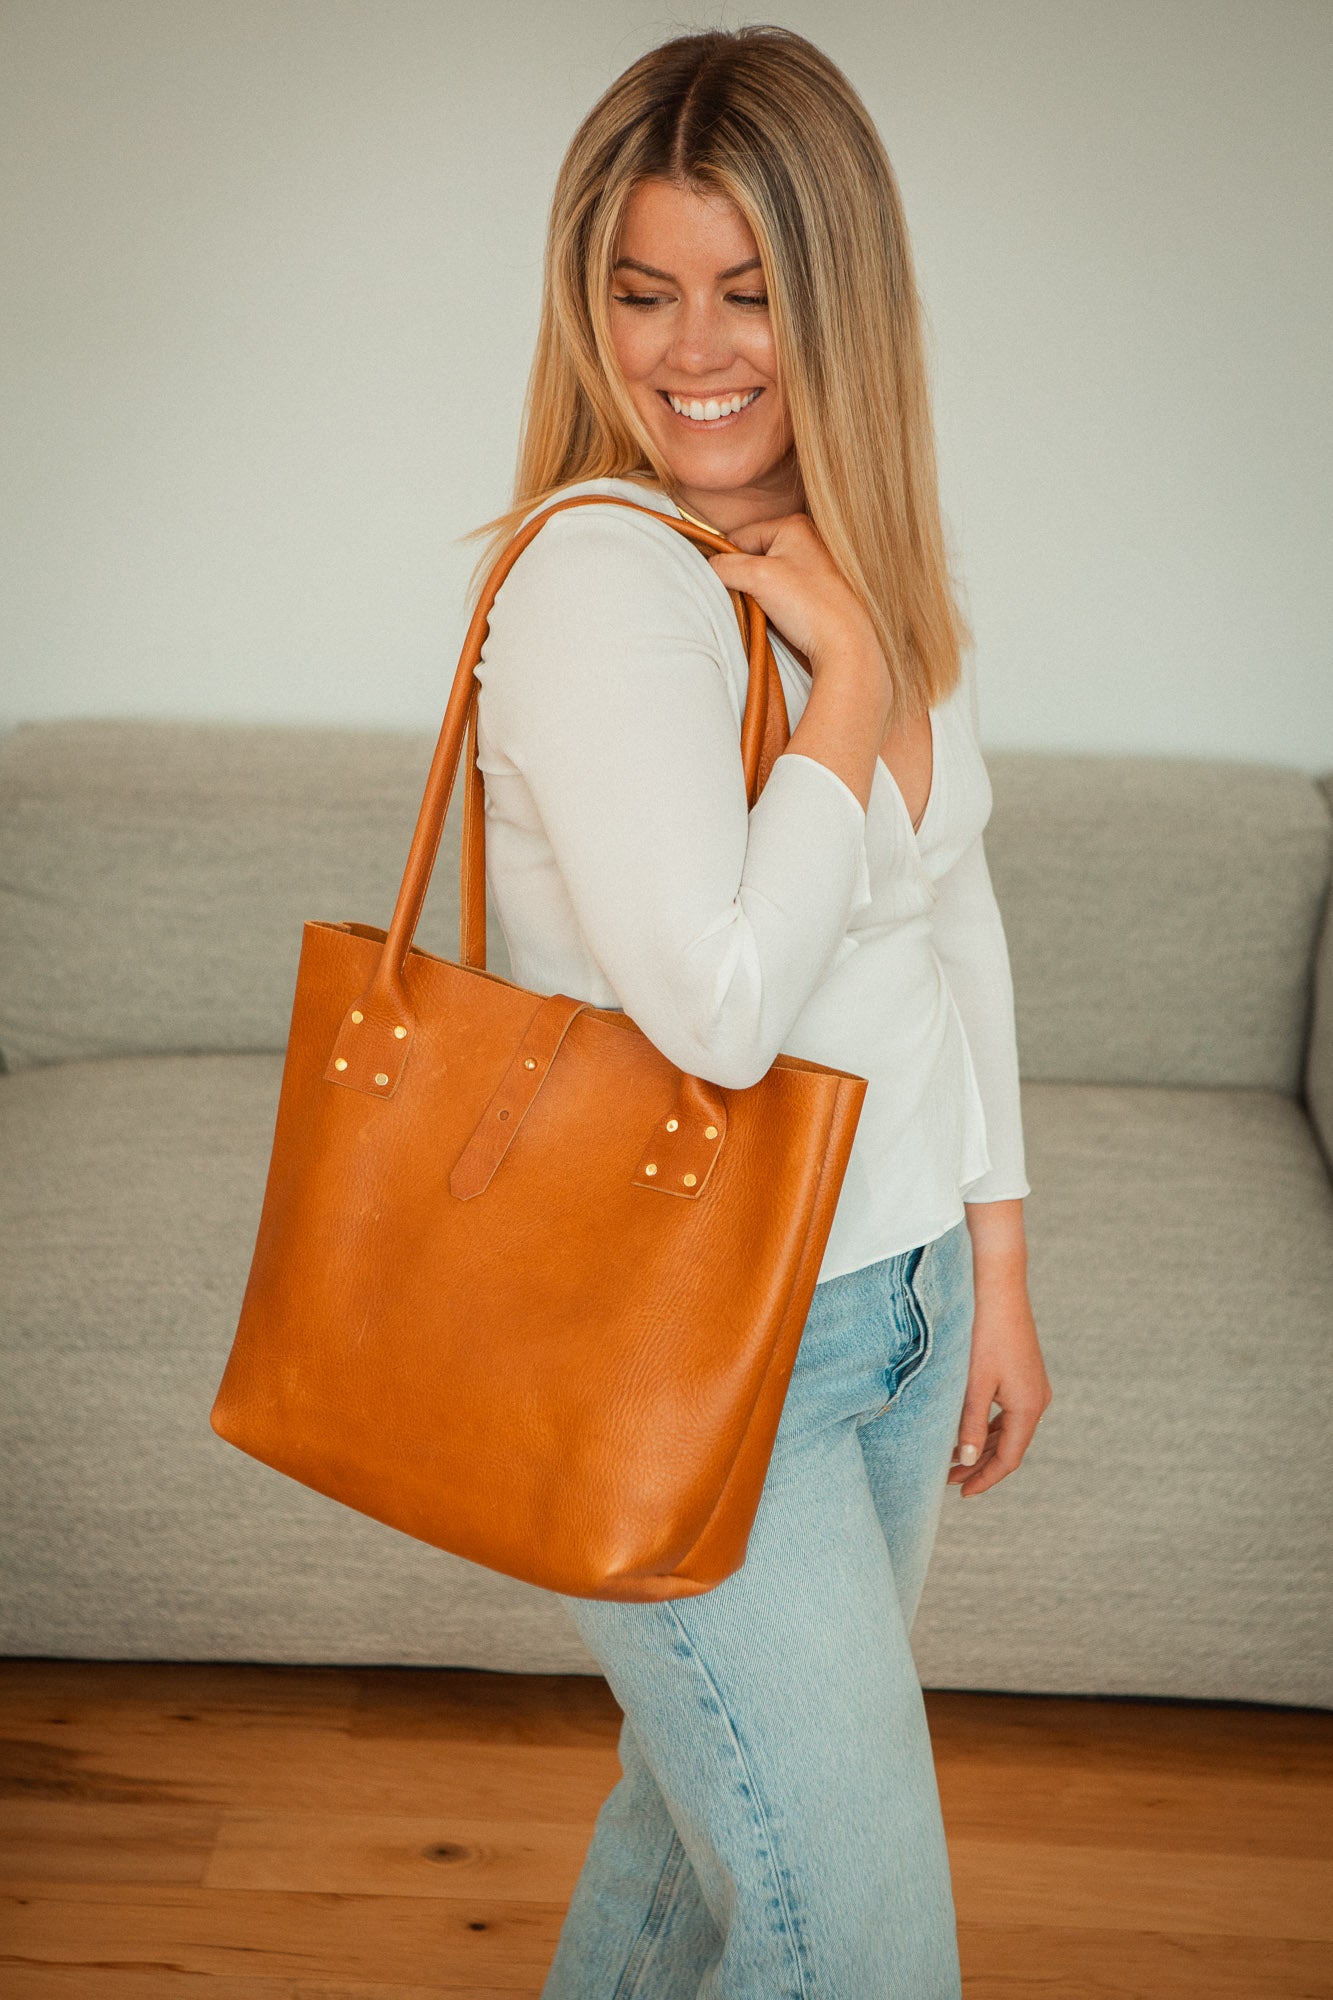 Leather Refined Tote in Brown Leather Bag - handcrafted by Market Canvas Leather in Tofino, BC, Canada